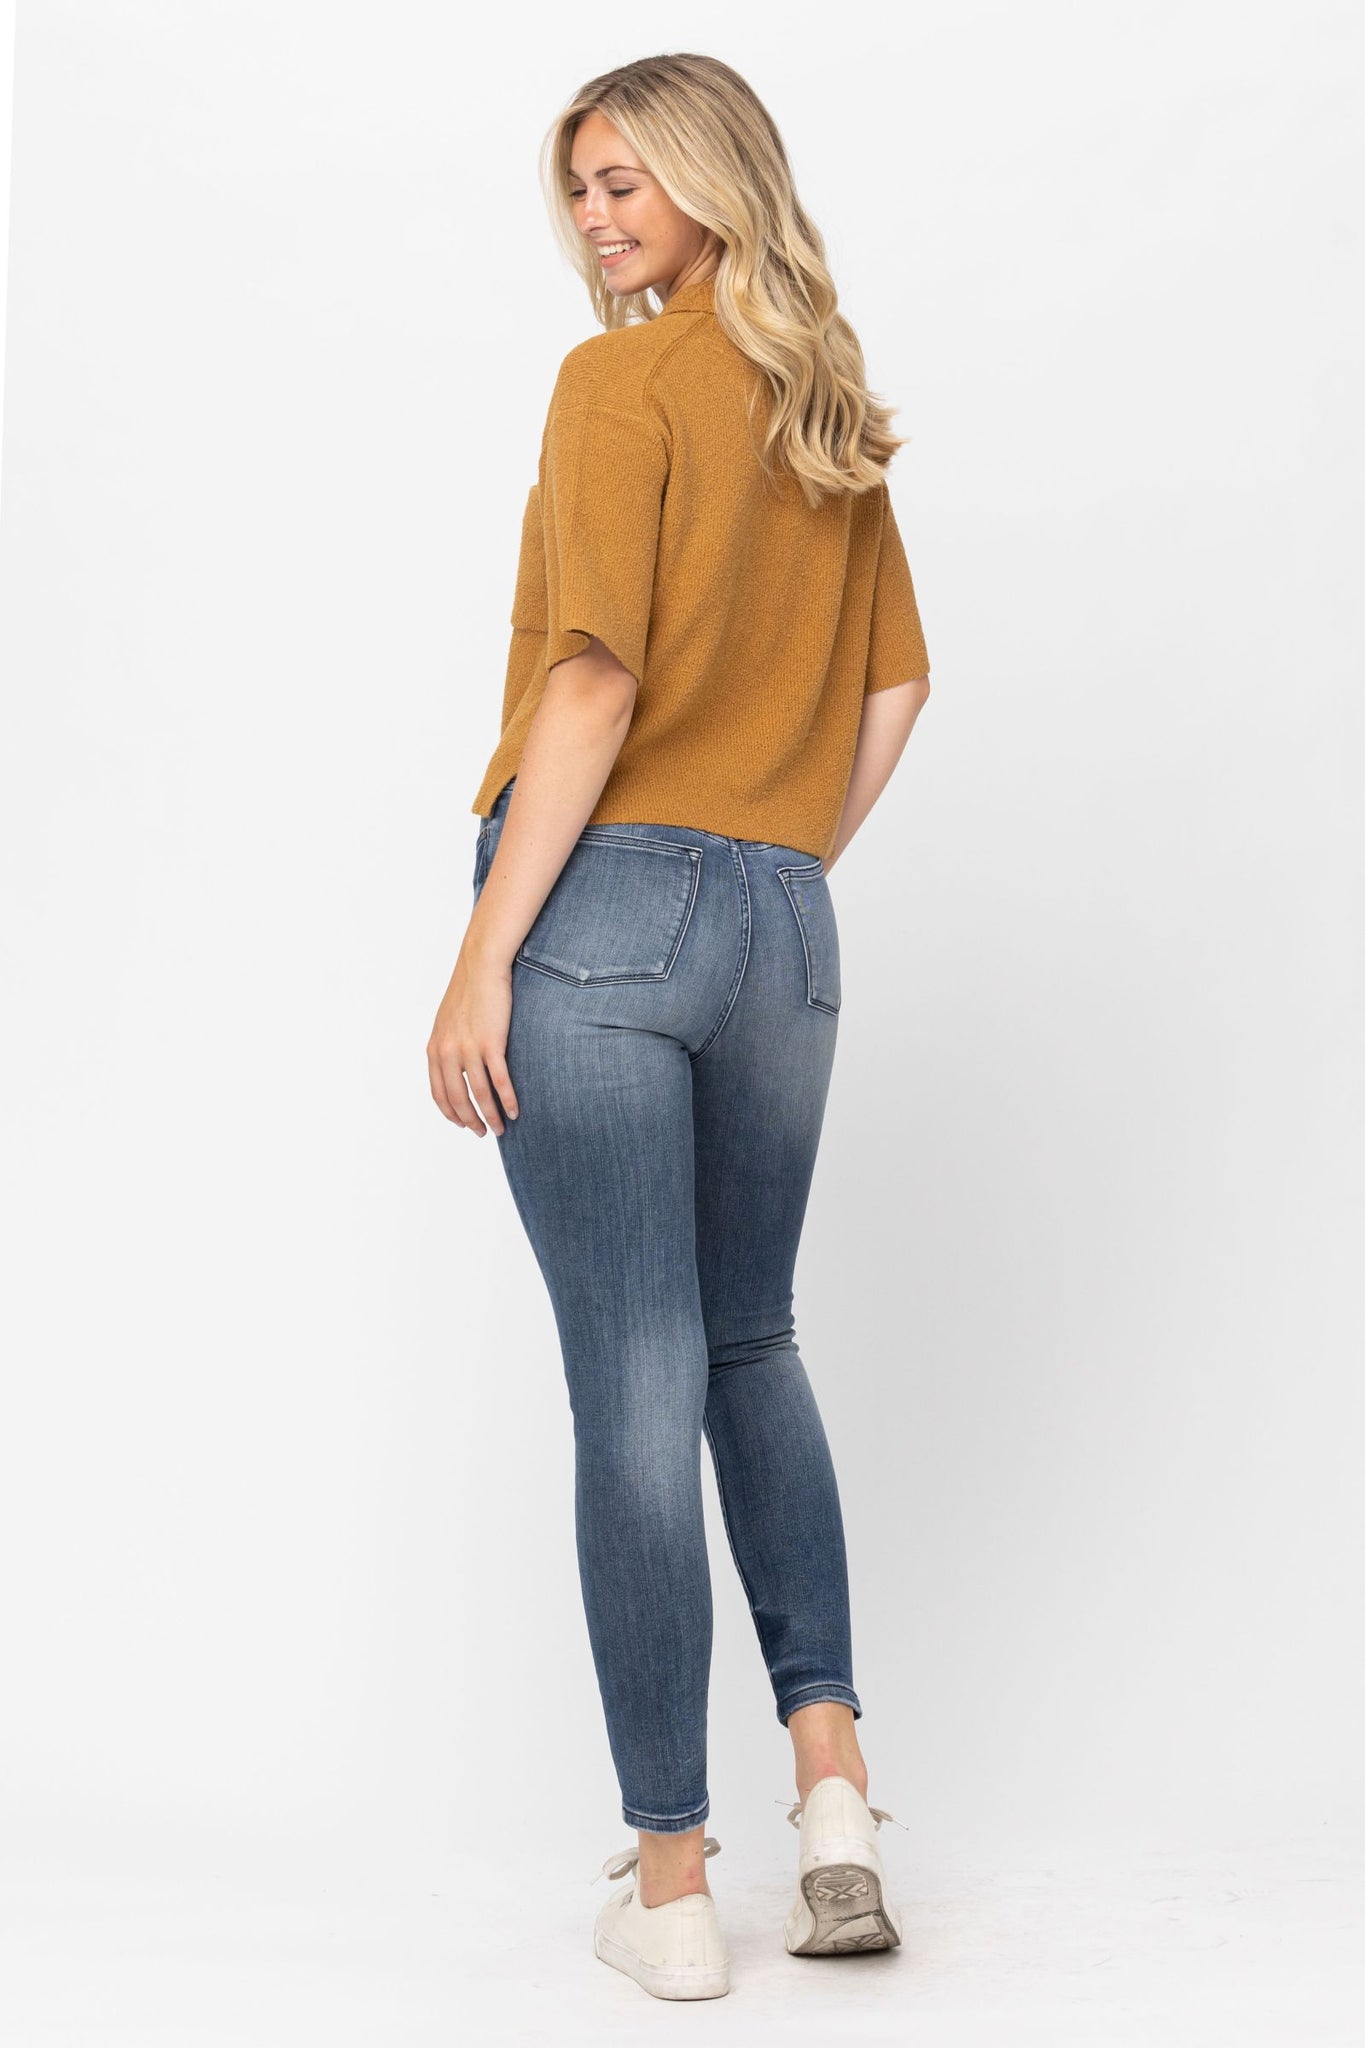 JUDY BLUE HIGH WAIST TUMMY CONTROL CONTRAST SKINNY JEANS – The Chandelier  Rose Boutique